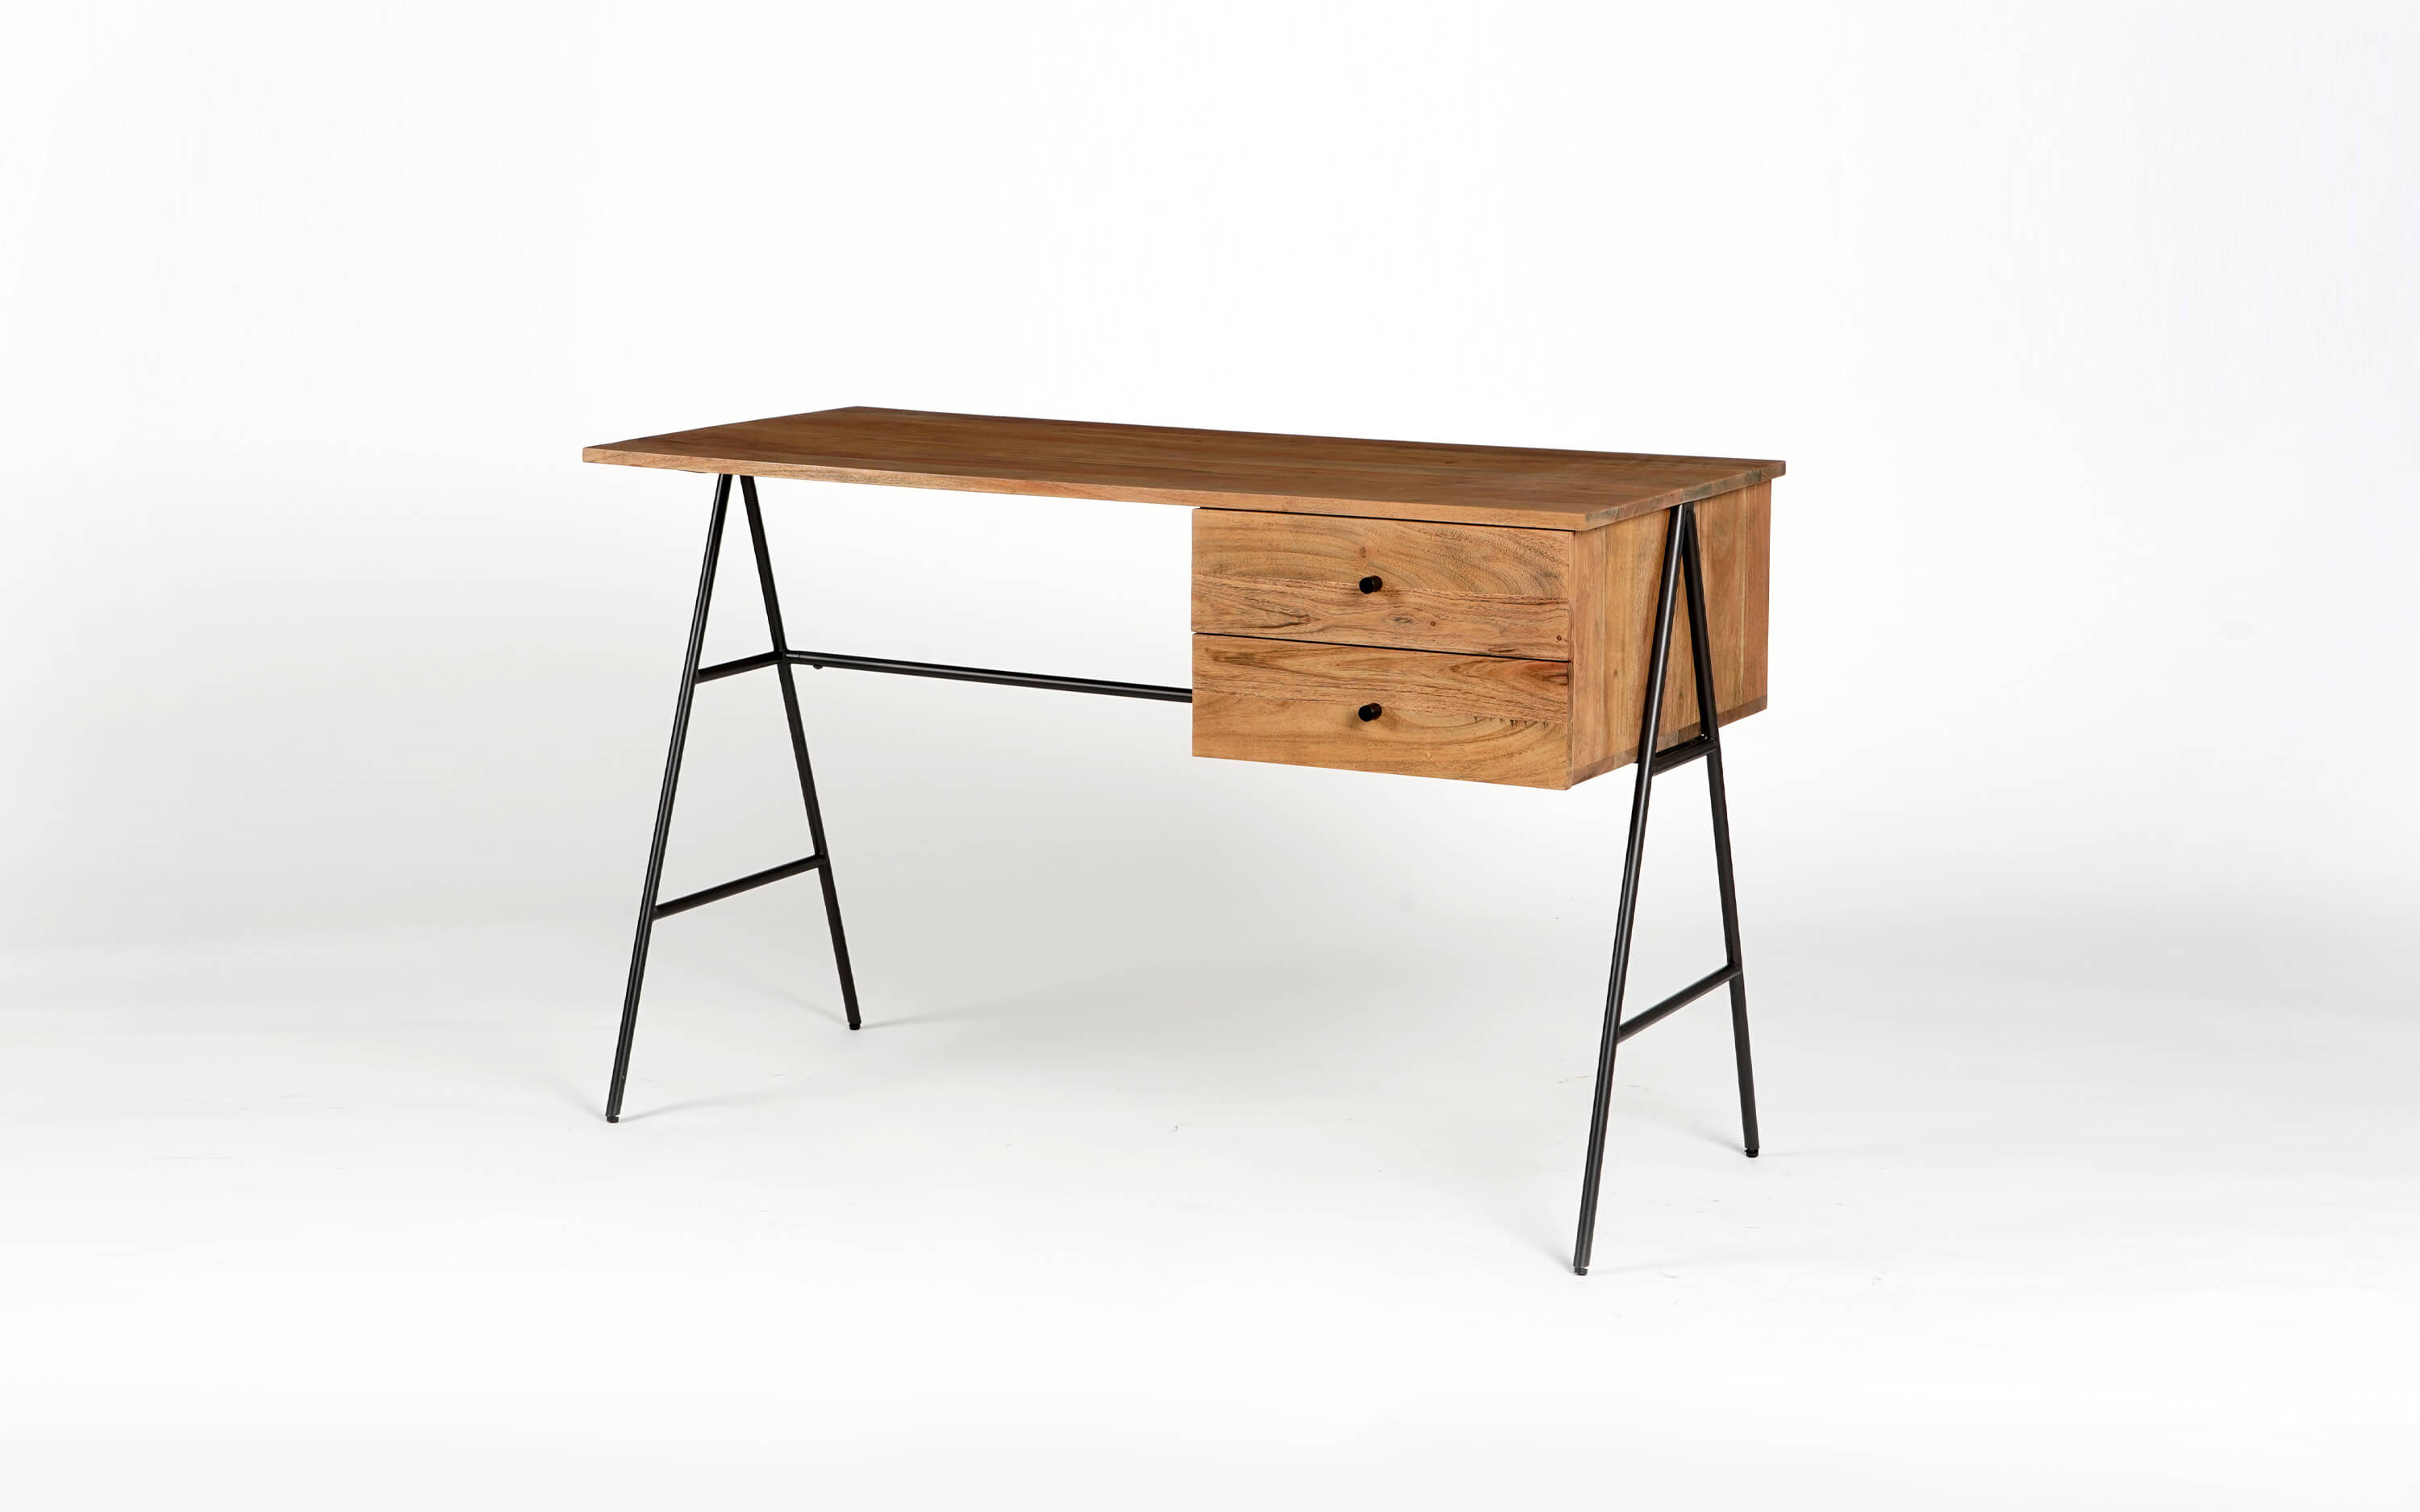 Emmy Modern Study Table for Kids with Drawers - Orange Tree Home Pvt. Ltd.